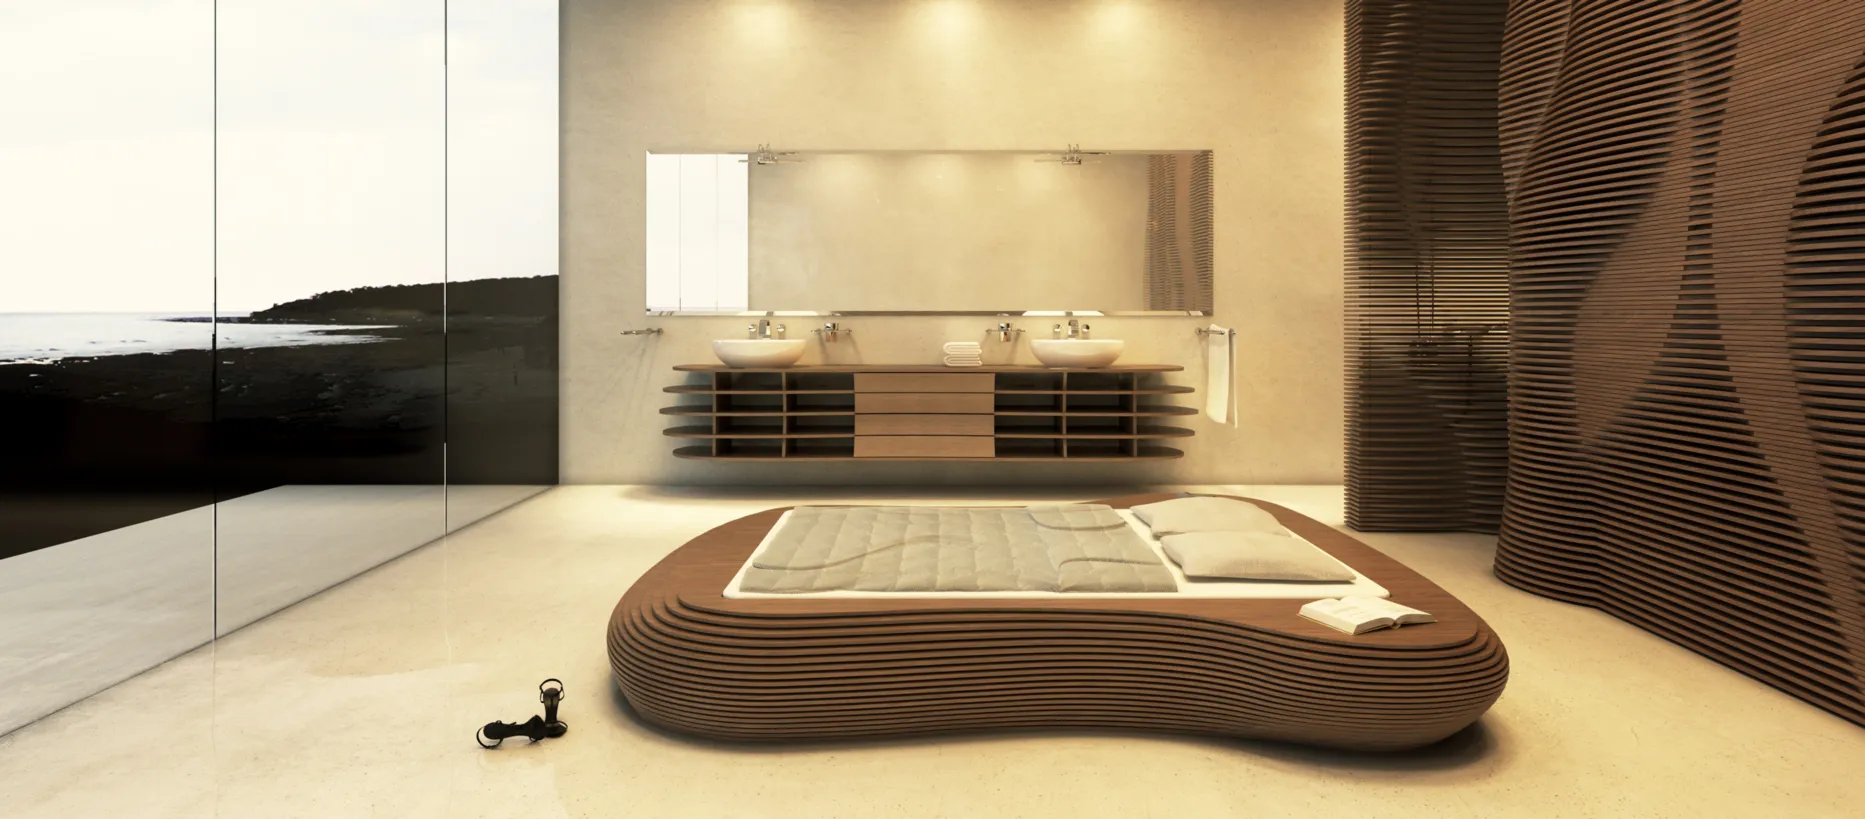 Our form.bar bed Dreamwave in exclusive designer beach house